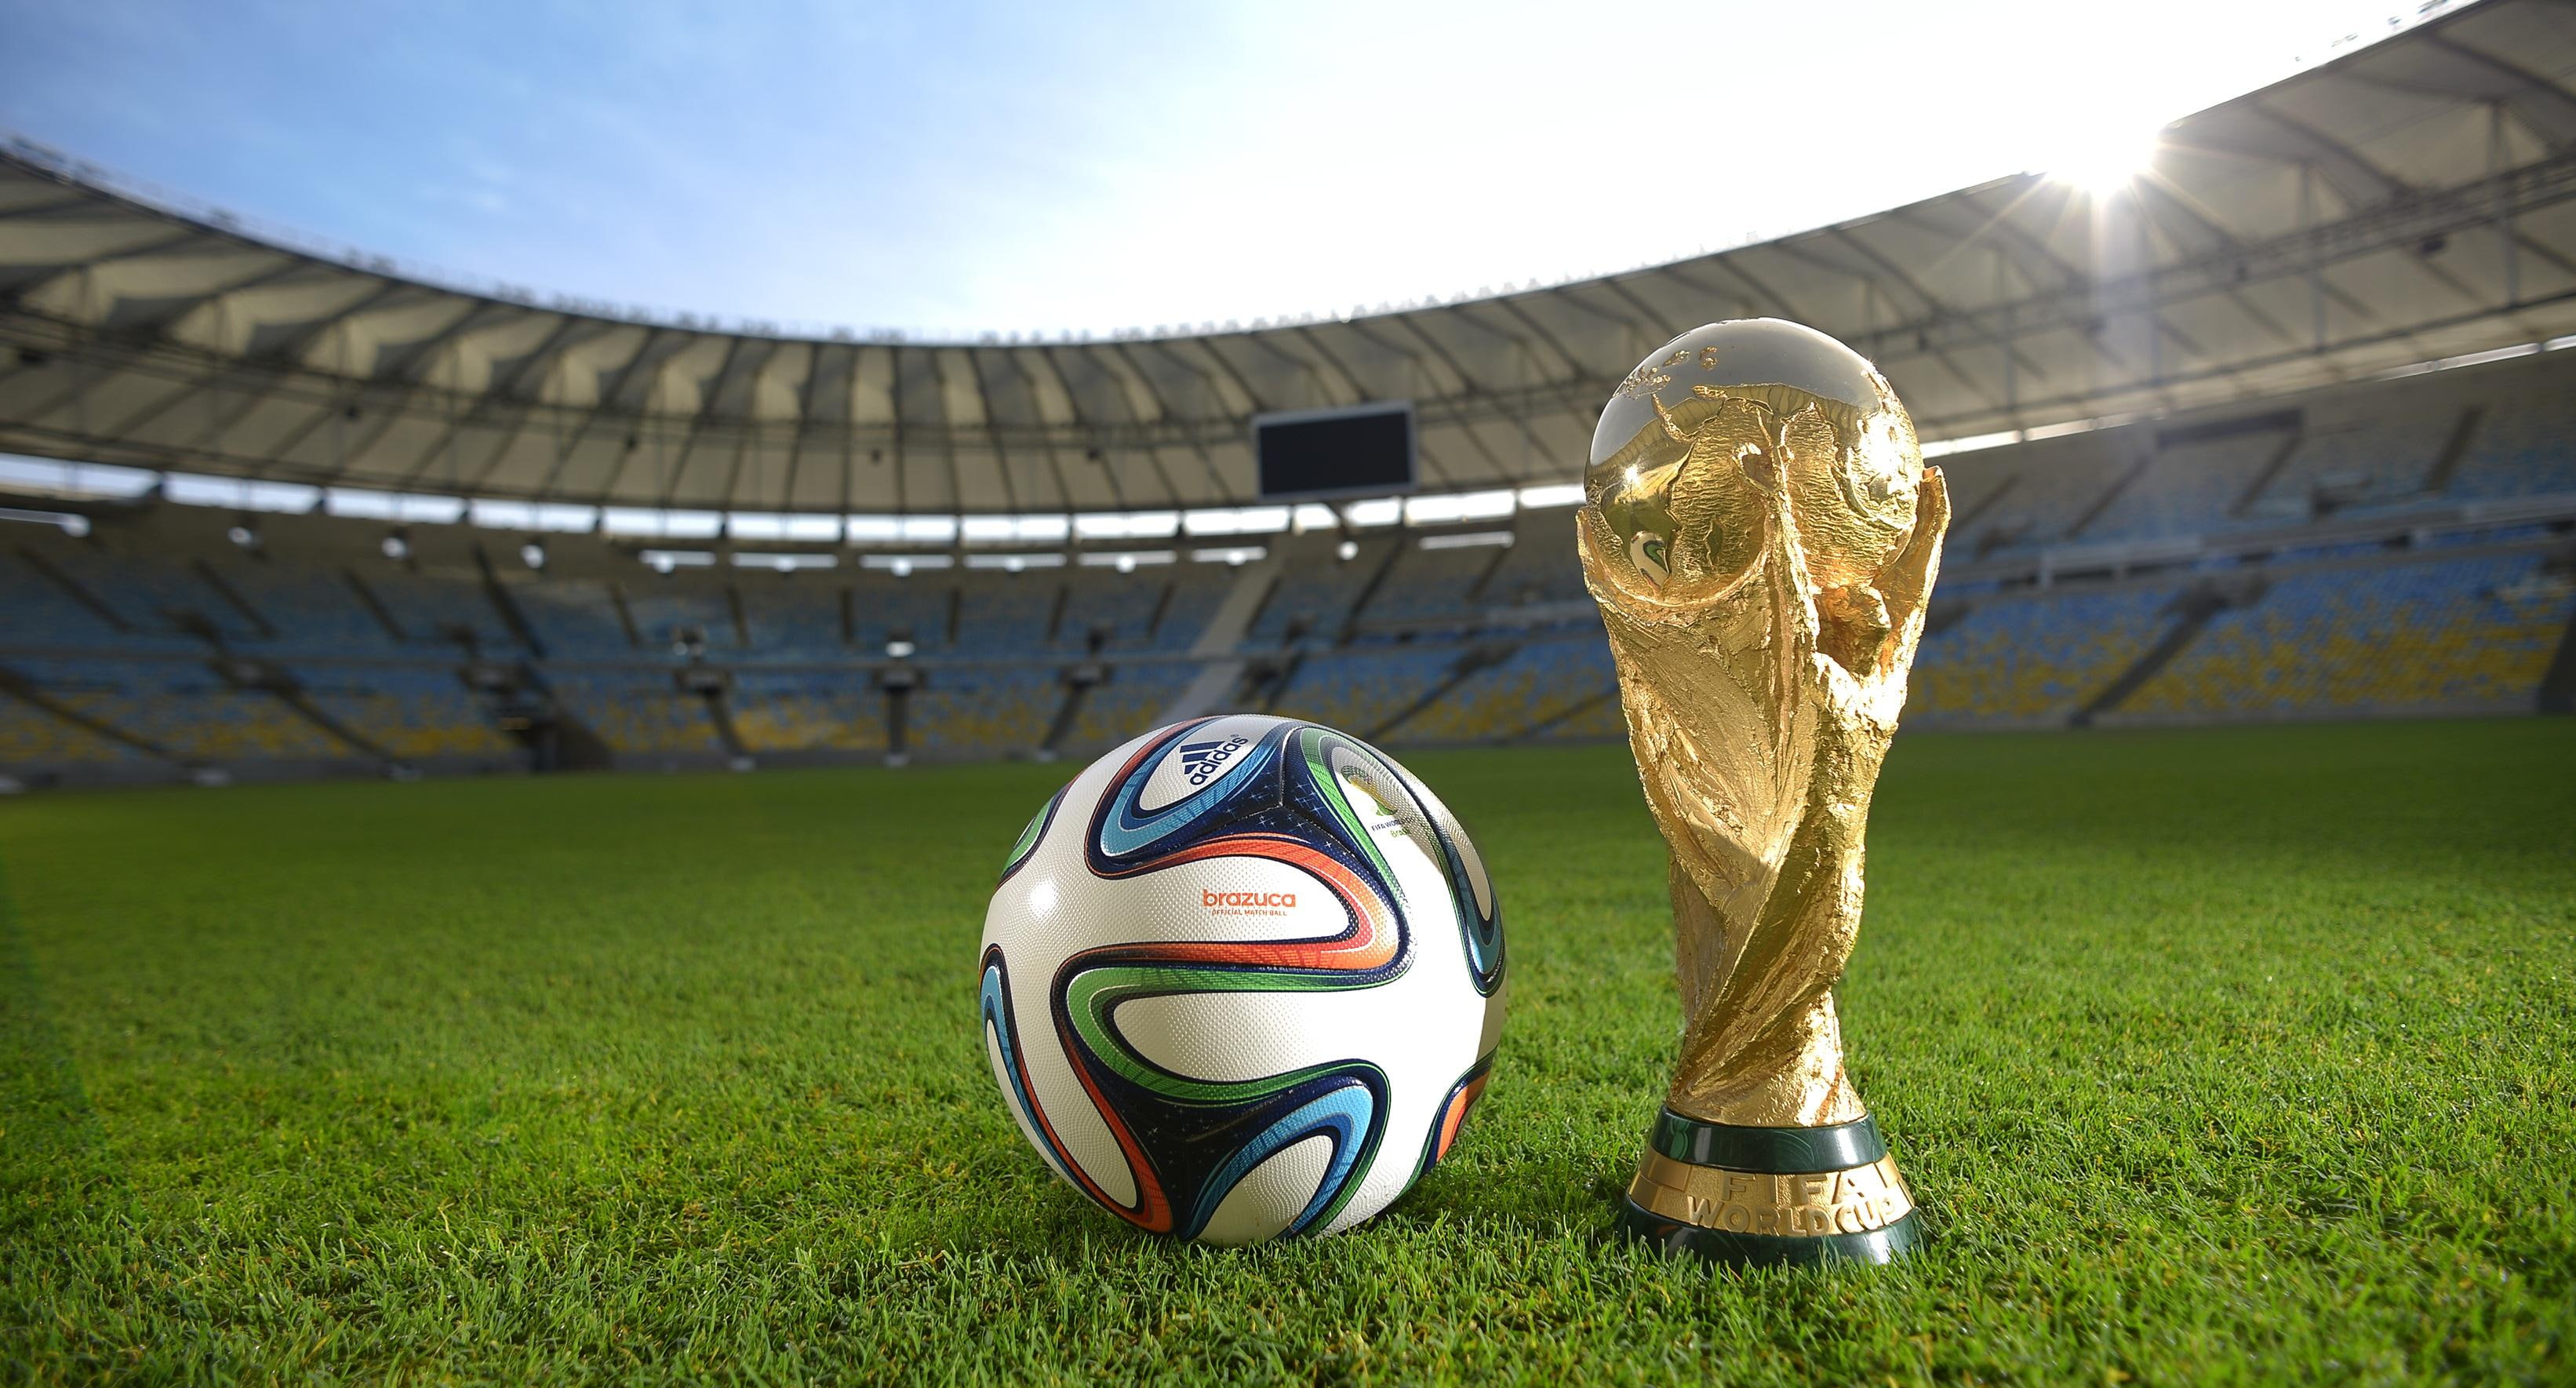 Brazuca ball of the 2014 World Cup in Brazil, gold plated ball award with soccer ball